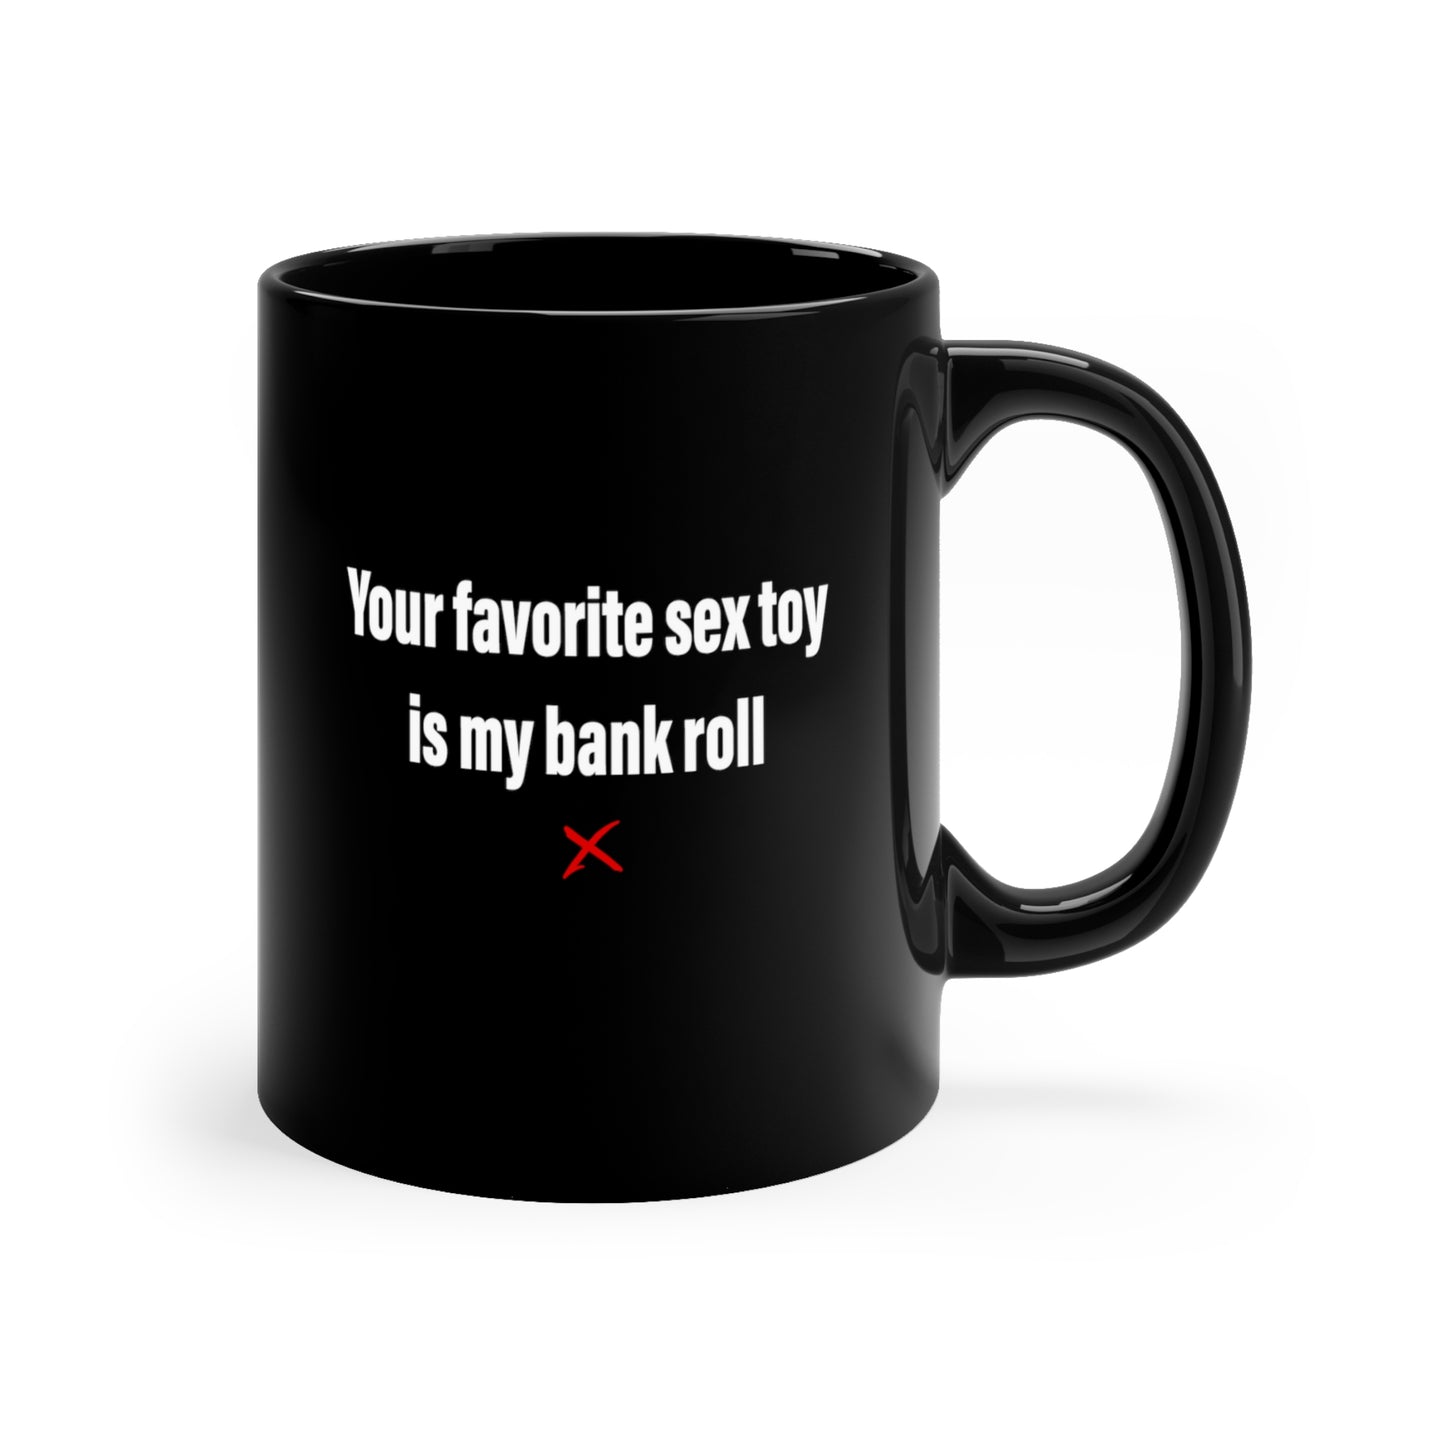 Your favorite sex toy is my bank roll - Mug